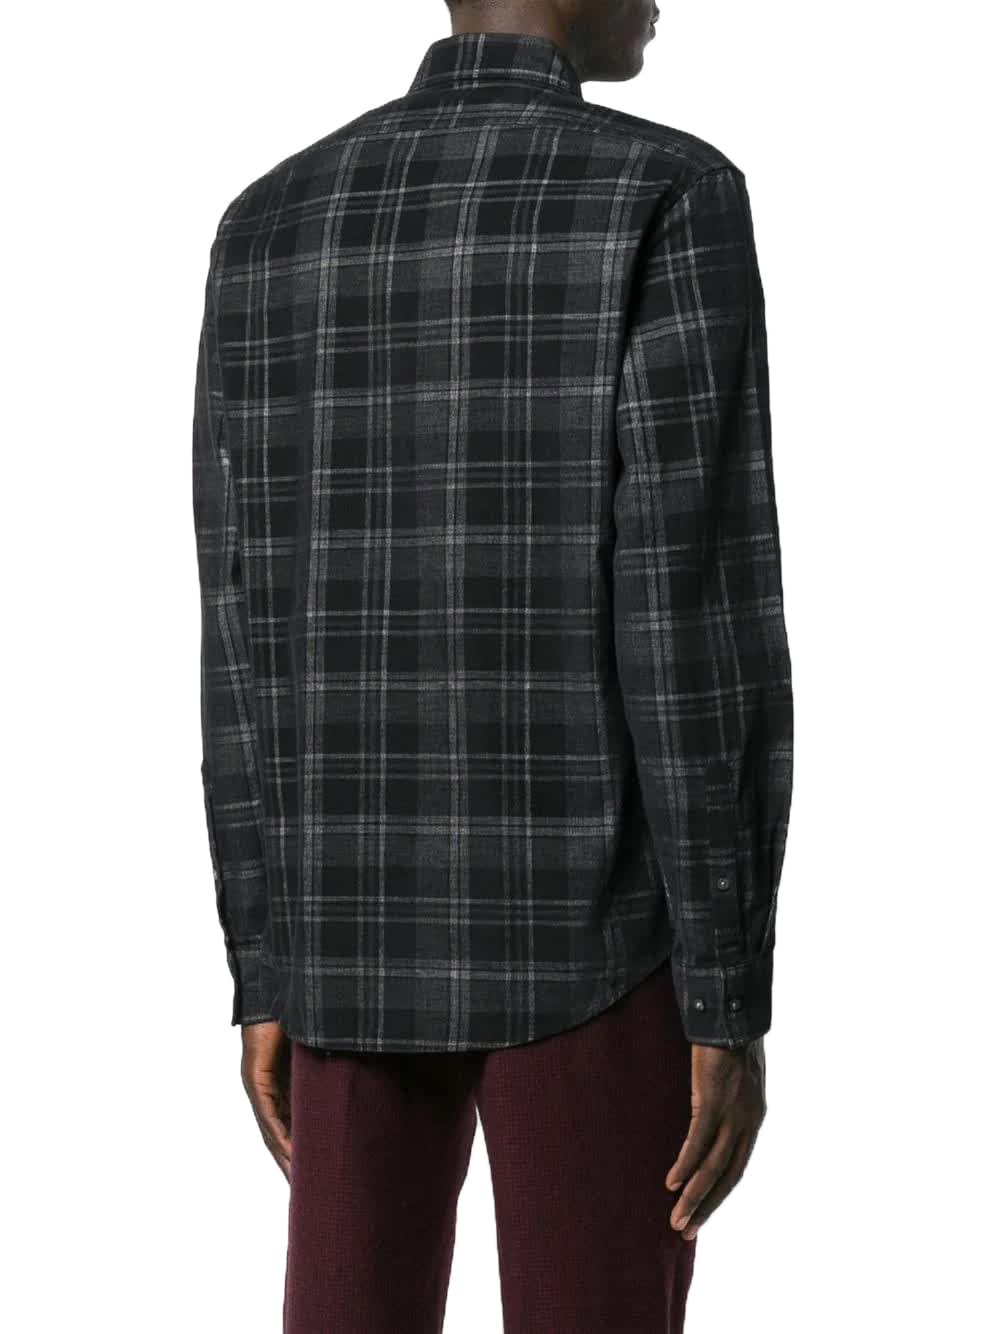 woocommerce-673321-2209615.cloudwaysapps.com-michael-kors-mens-black-checked-long-sleeves-button-down-shirt